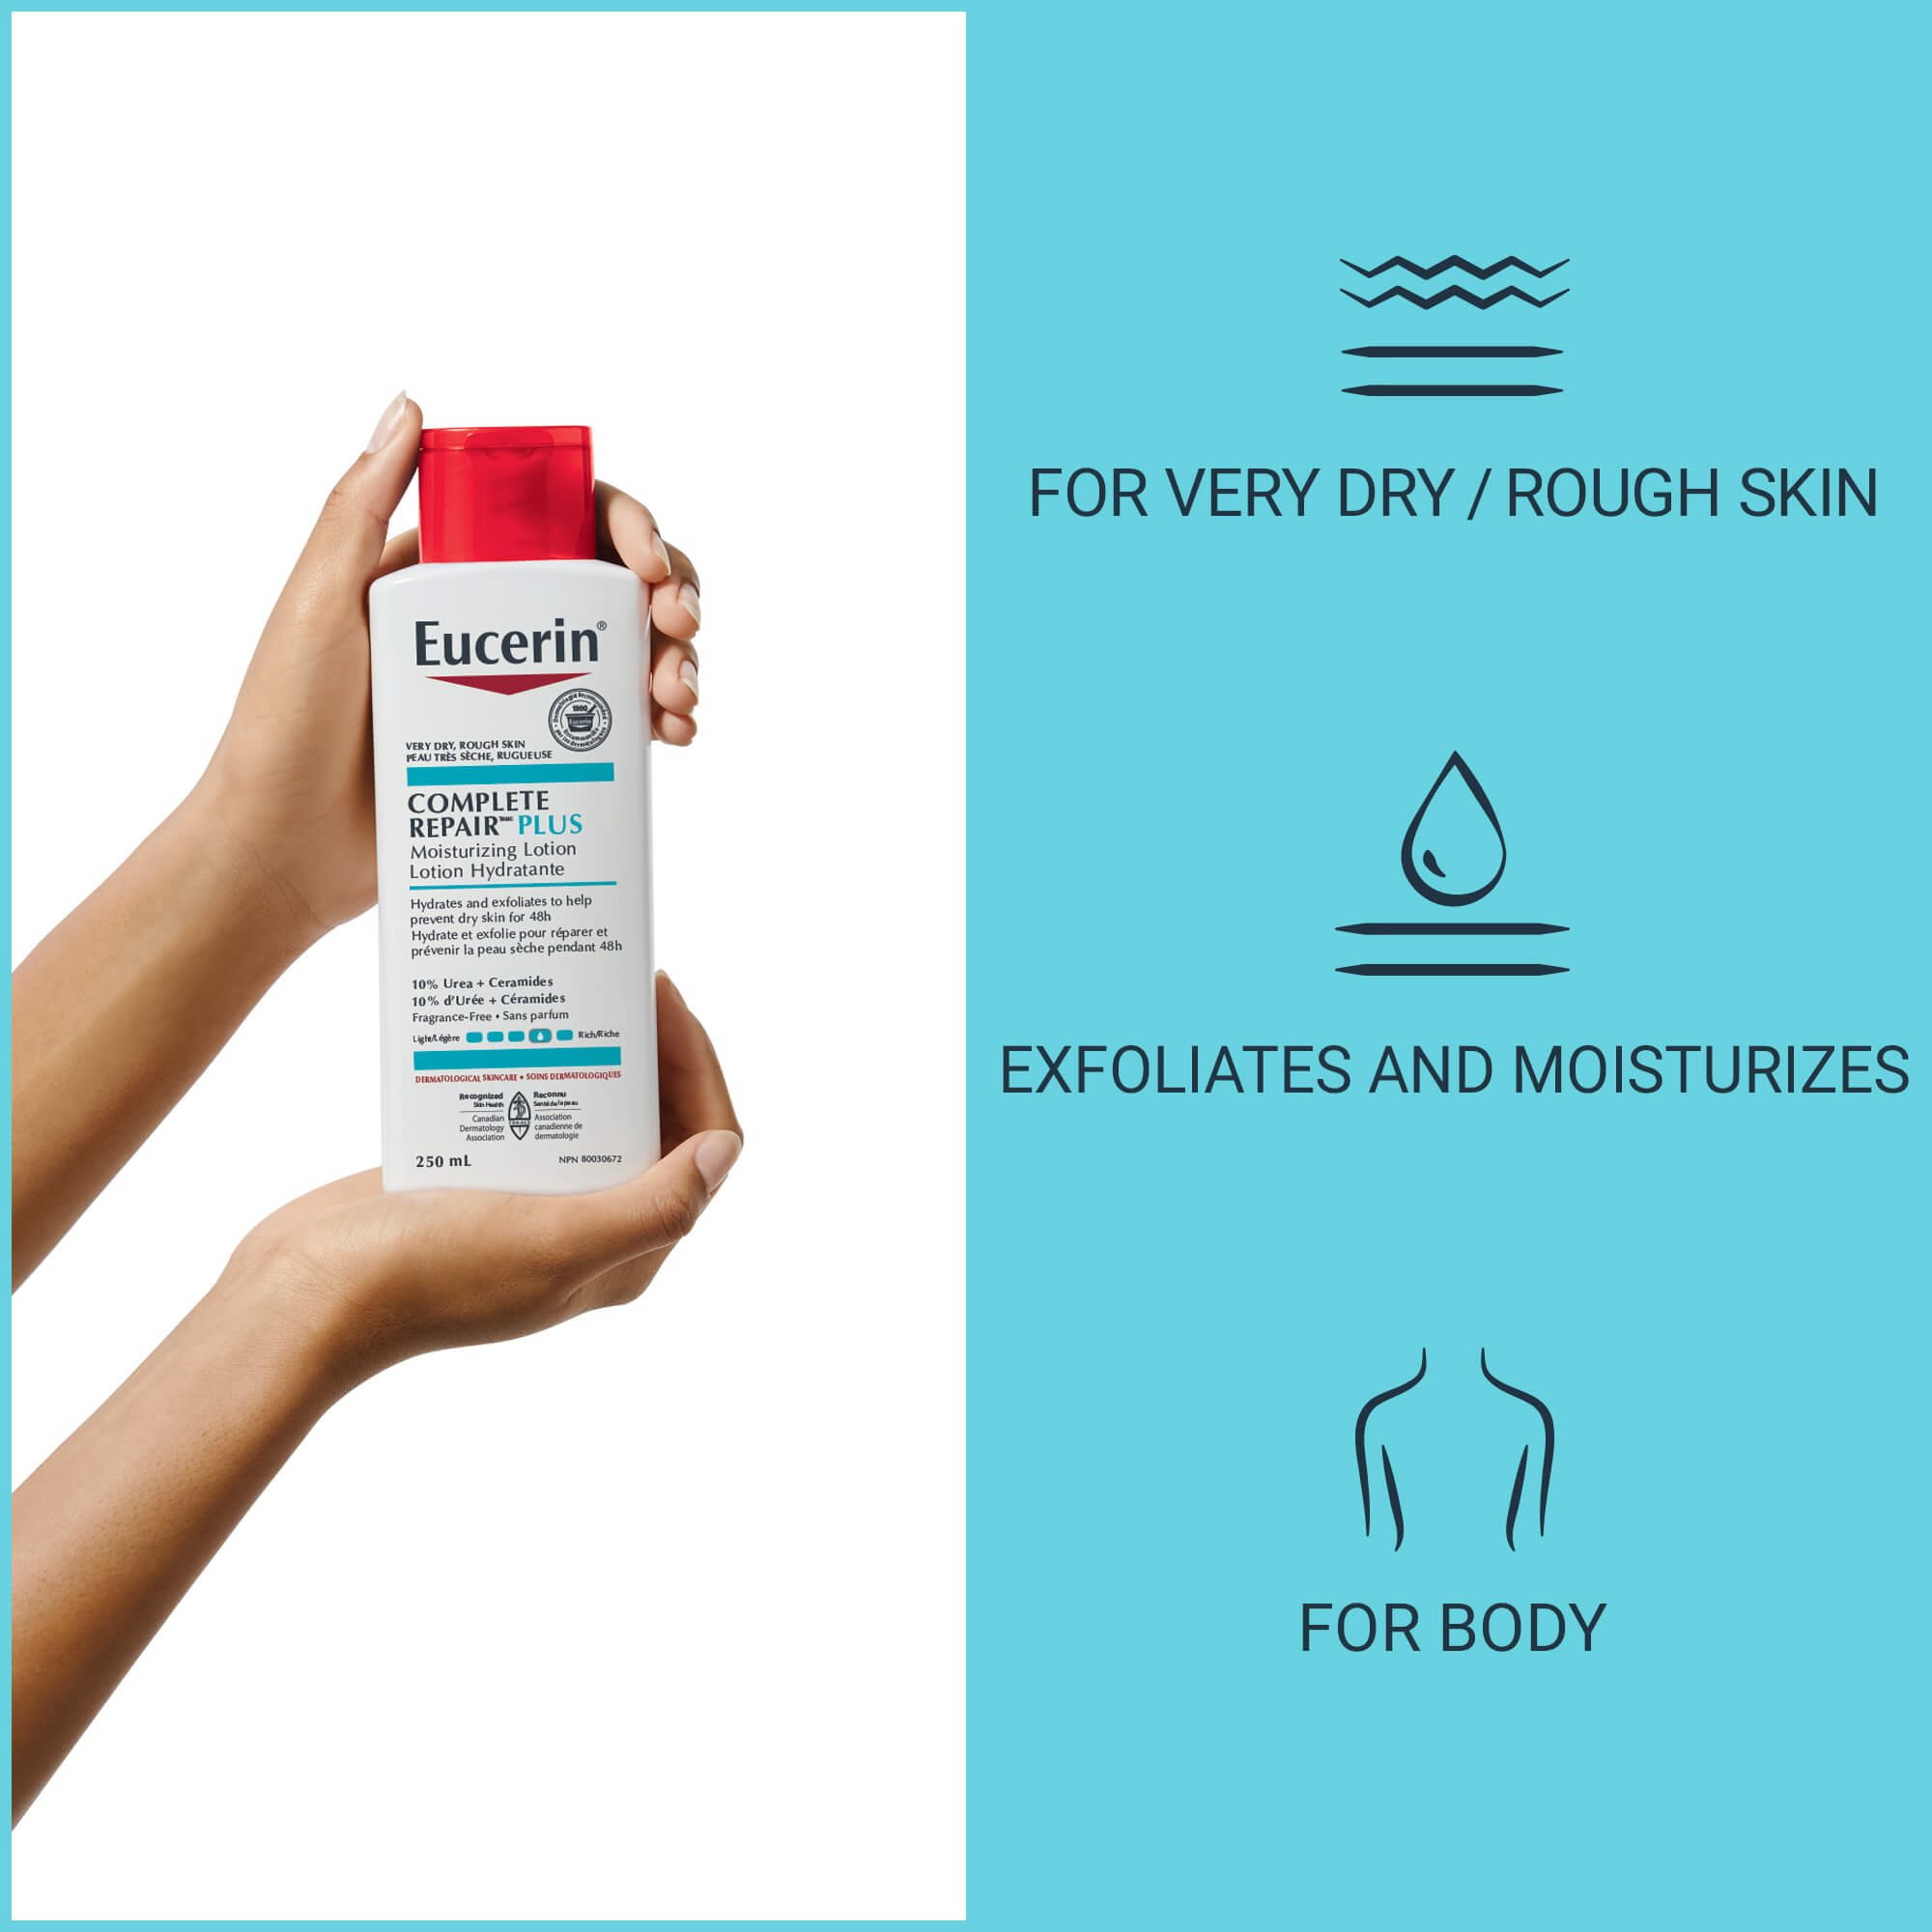 Image of a woman holding a bottle of Eucerin Complete Repair Plus Lotion.